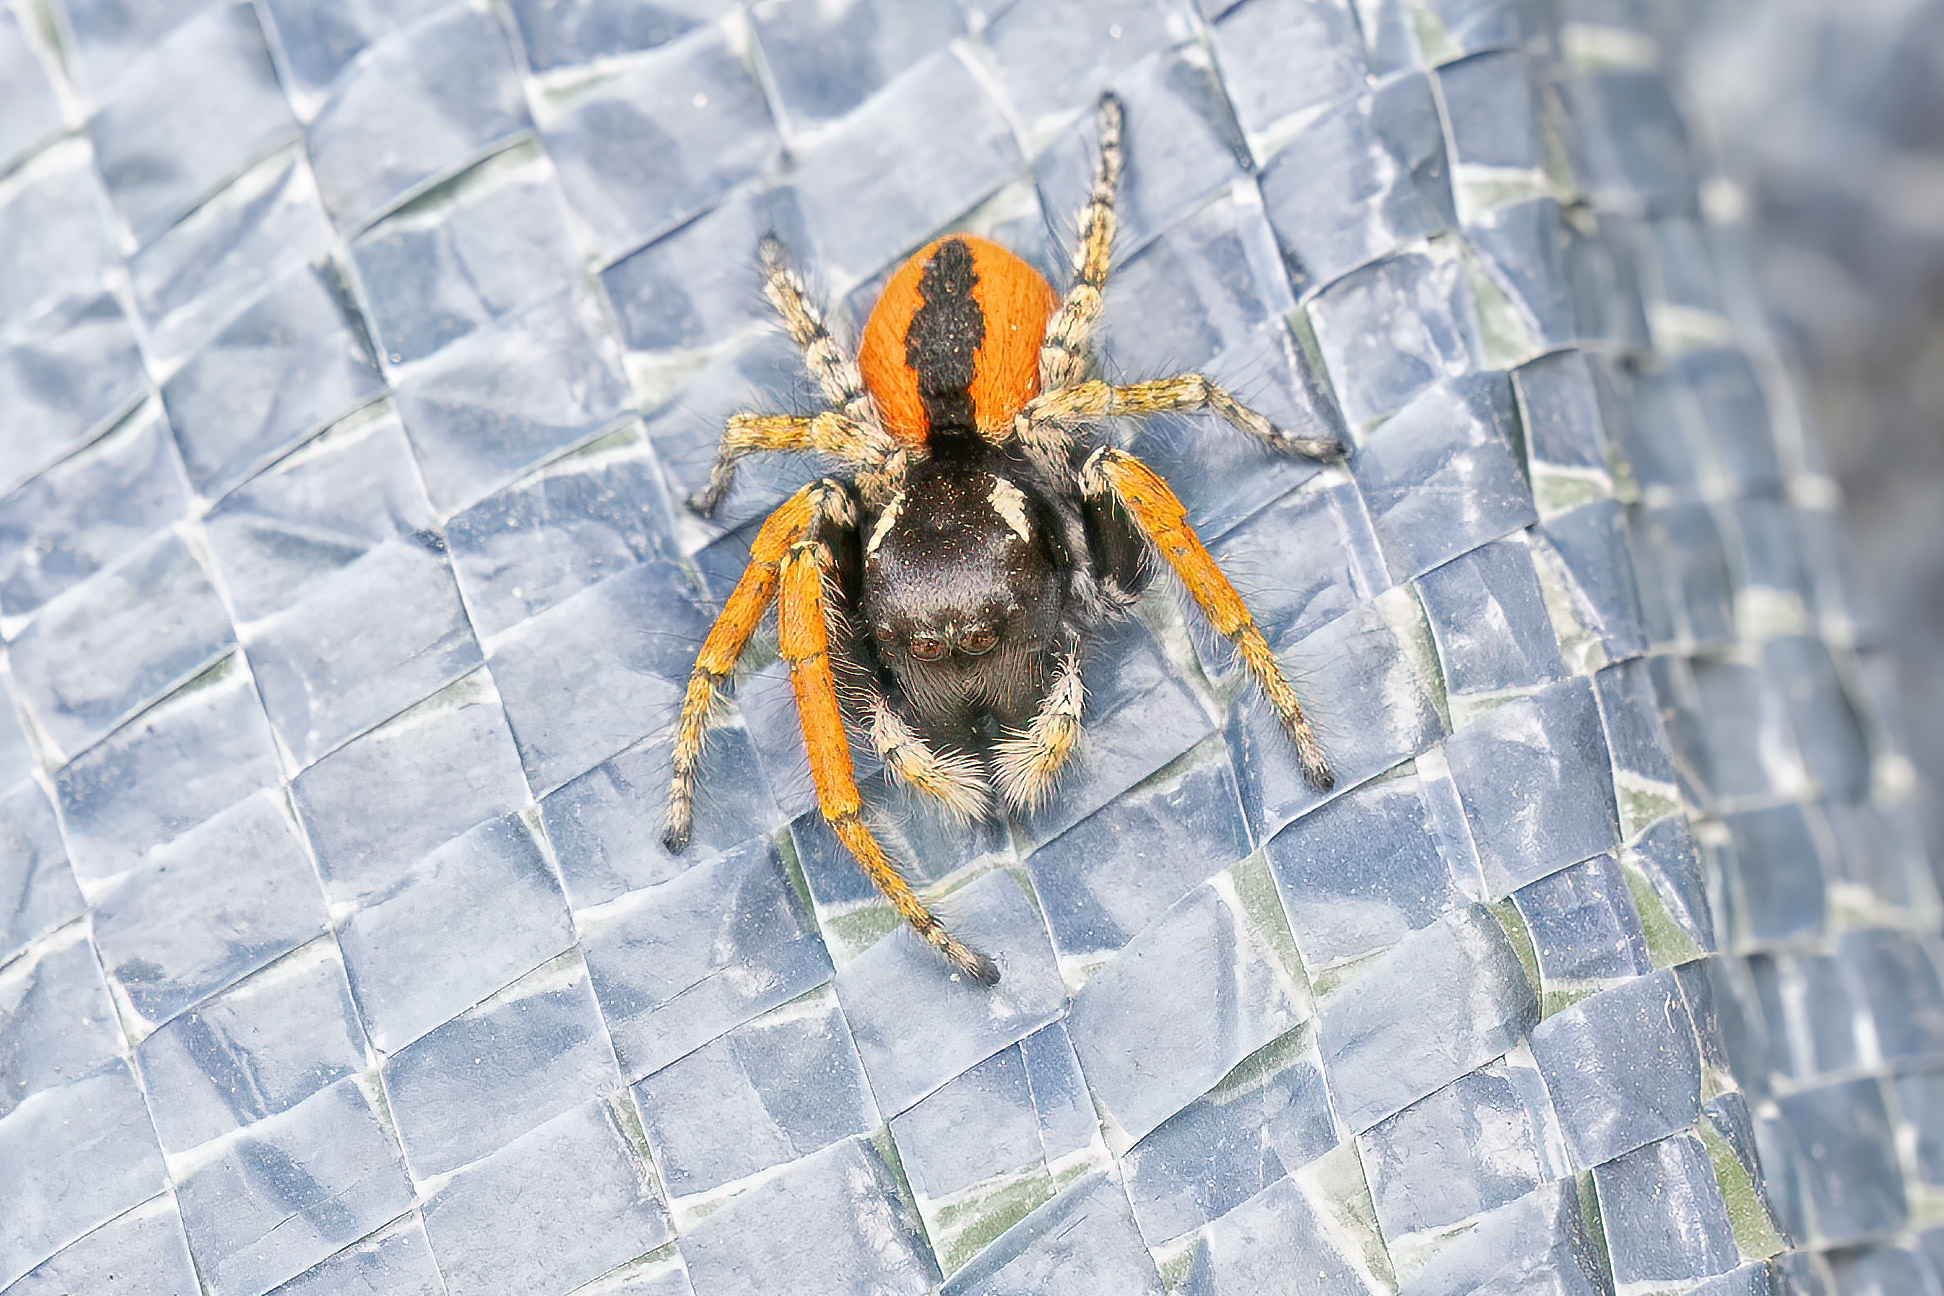 Philaeus chrysops - red jumping spider...